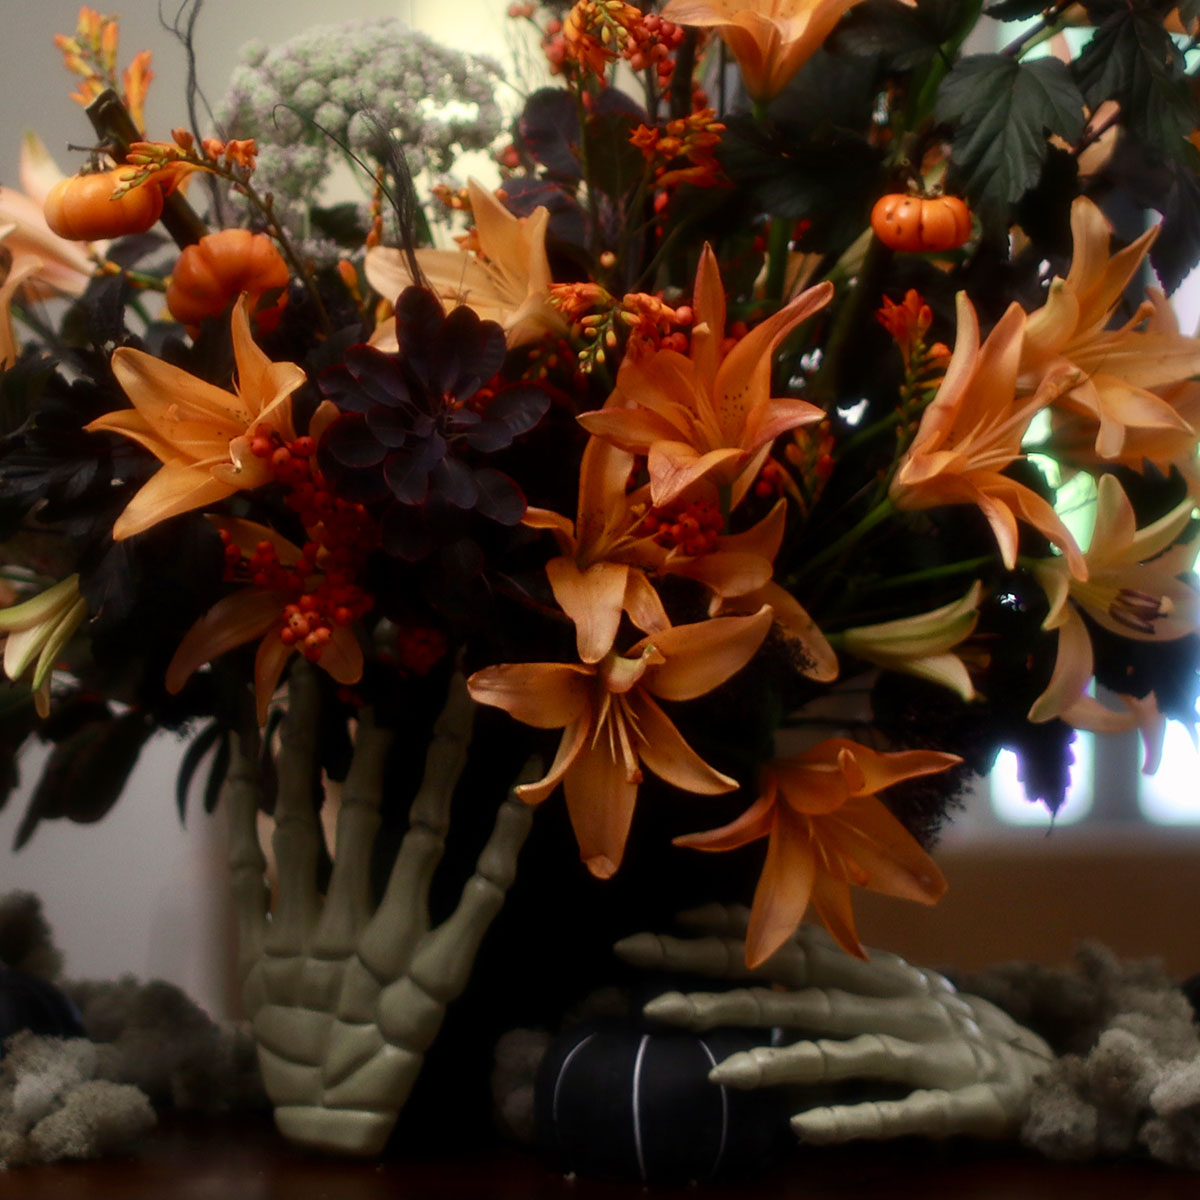 aniska-creations-loves-halloween-and-lilies-featured